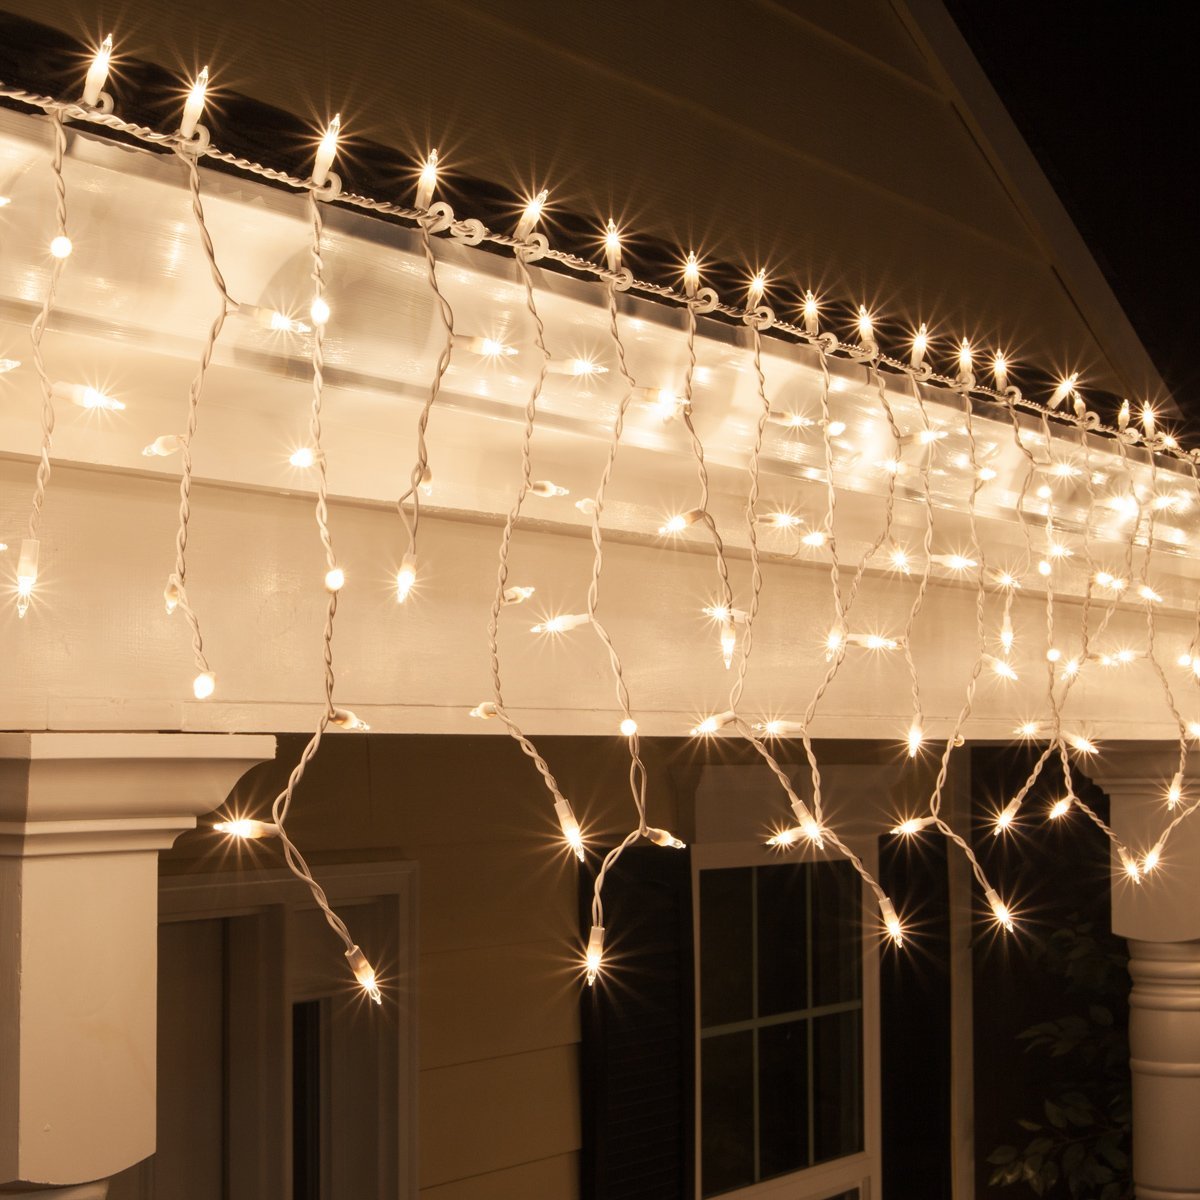 Outdoor Lighting Ideas To Set You On The Mood For The Next Season 3 Outdoor Lighting Ideas